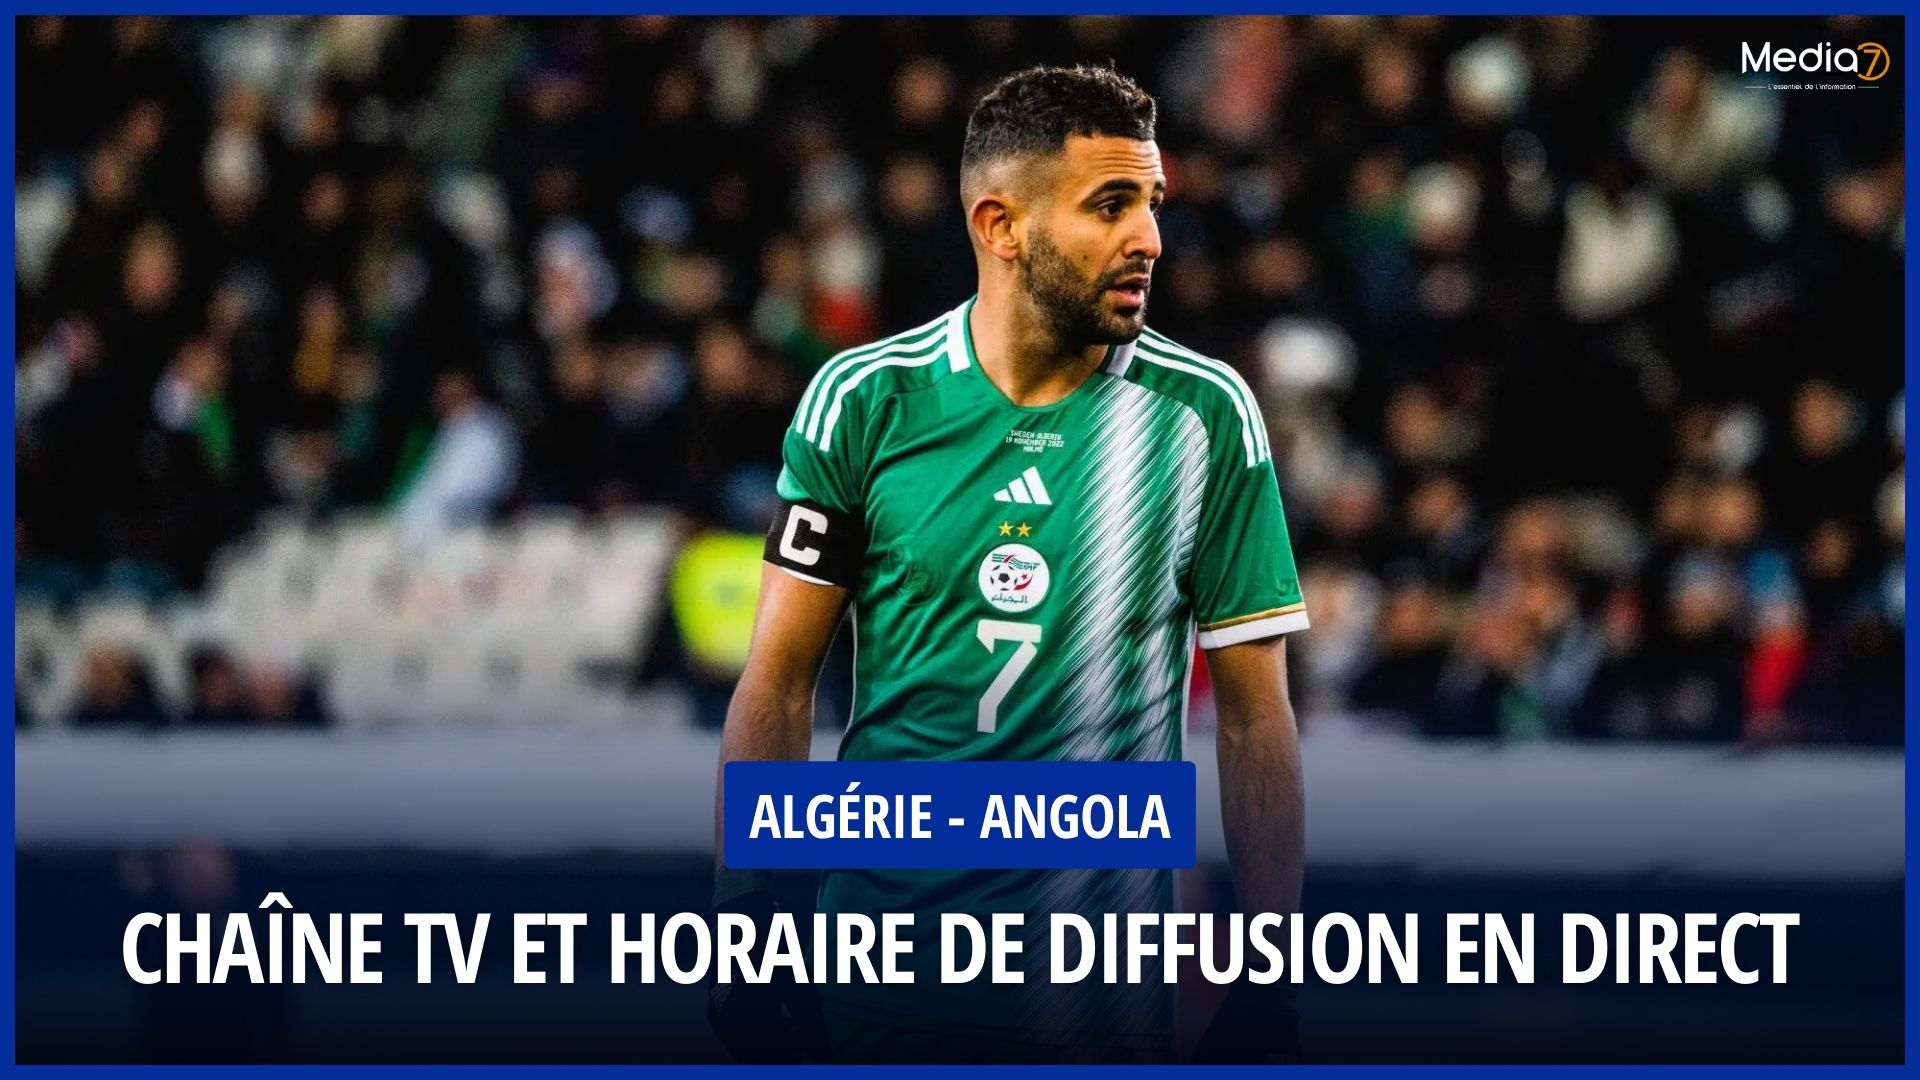 Not to be missed: Algeria - Angola Match Live, TV Channel and Broadcast Time - Media7